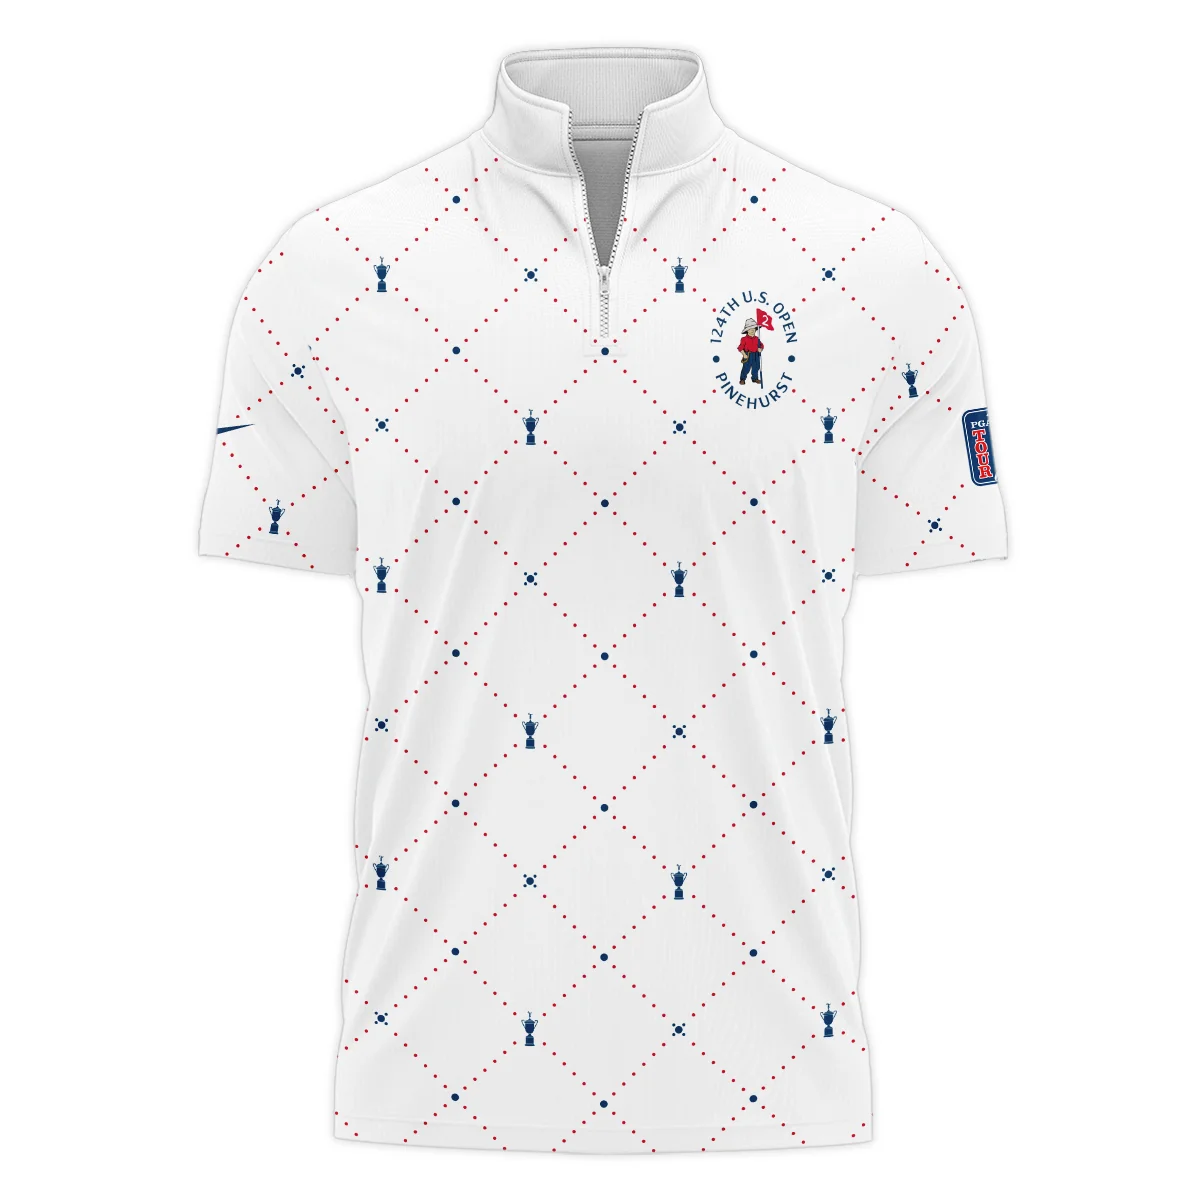 Argyle Pattern With Cup 124th U.S. Open Pinehurst Nike Vneck Long Polo Shirt Style Classic Long Polo Shirt For Men